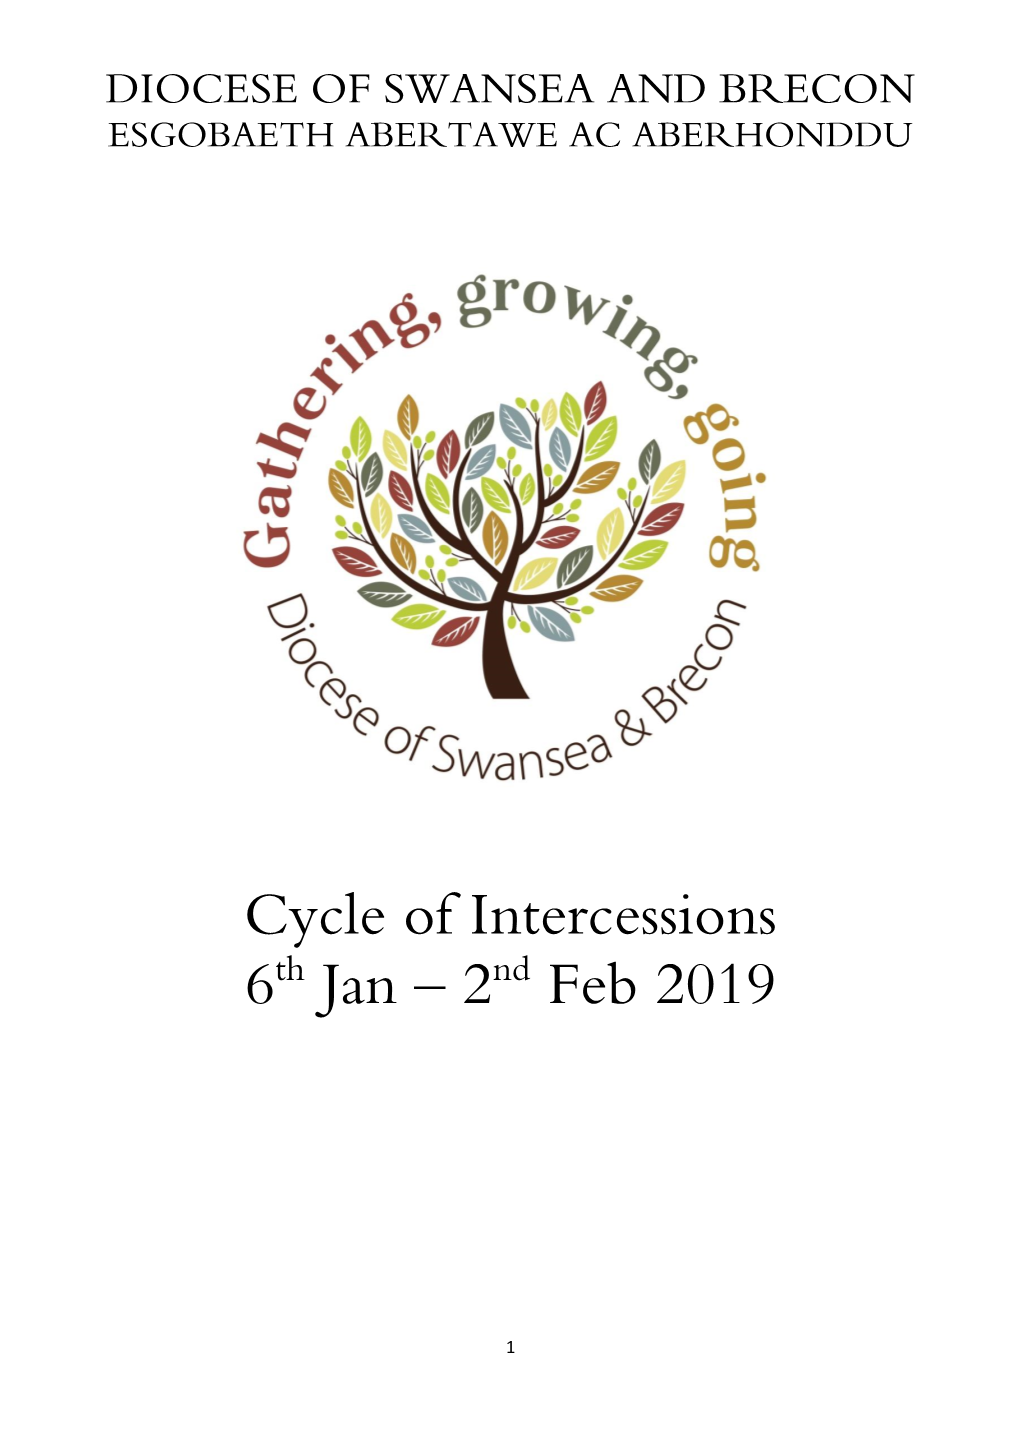 Cycle of Intercessions 6Th Jan – 2Nd Feb 2019